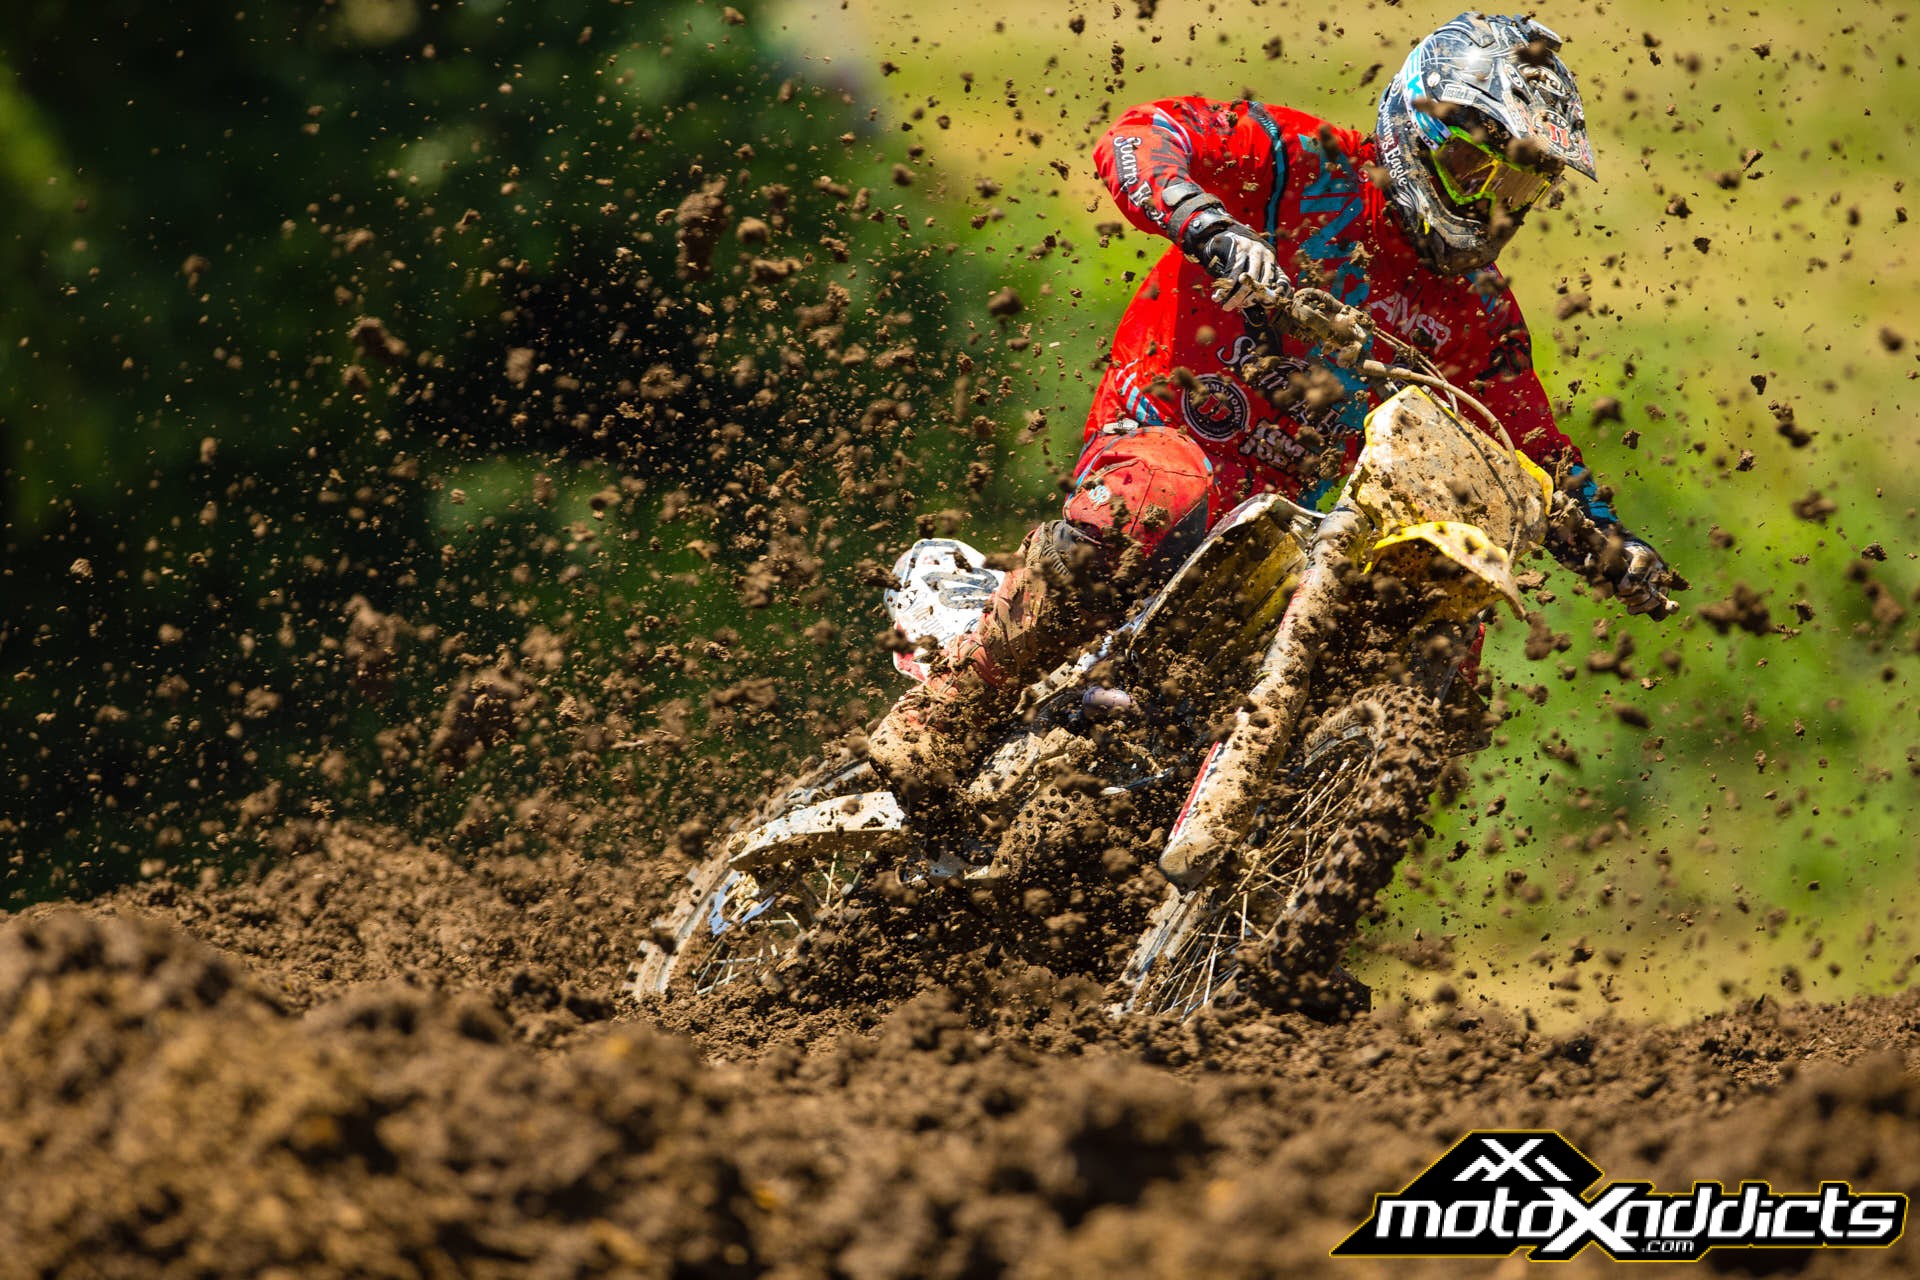 Broc Tickle's 3rd overall put two RCH / Suzuki's on the same podium for the first time in the teams history.